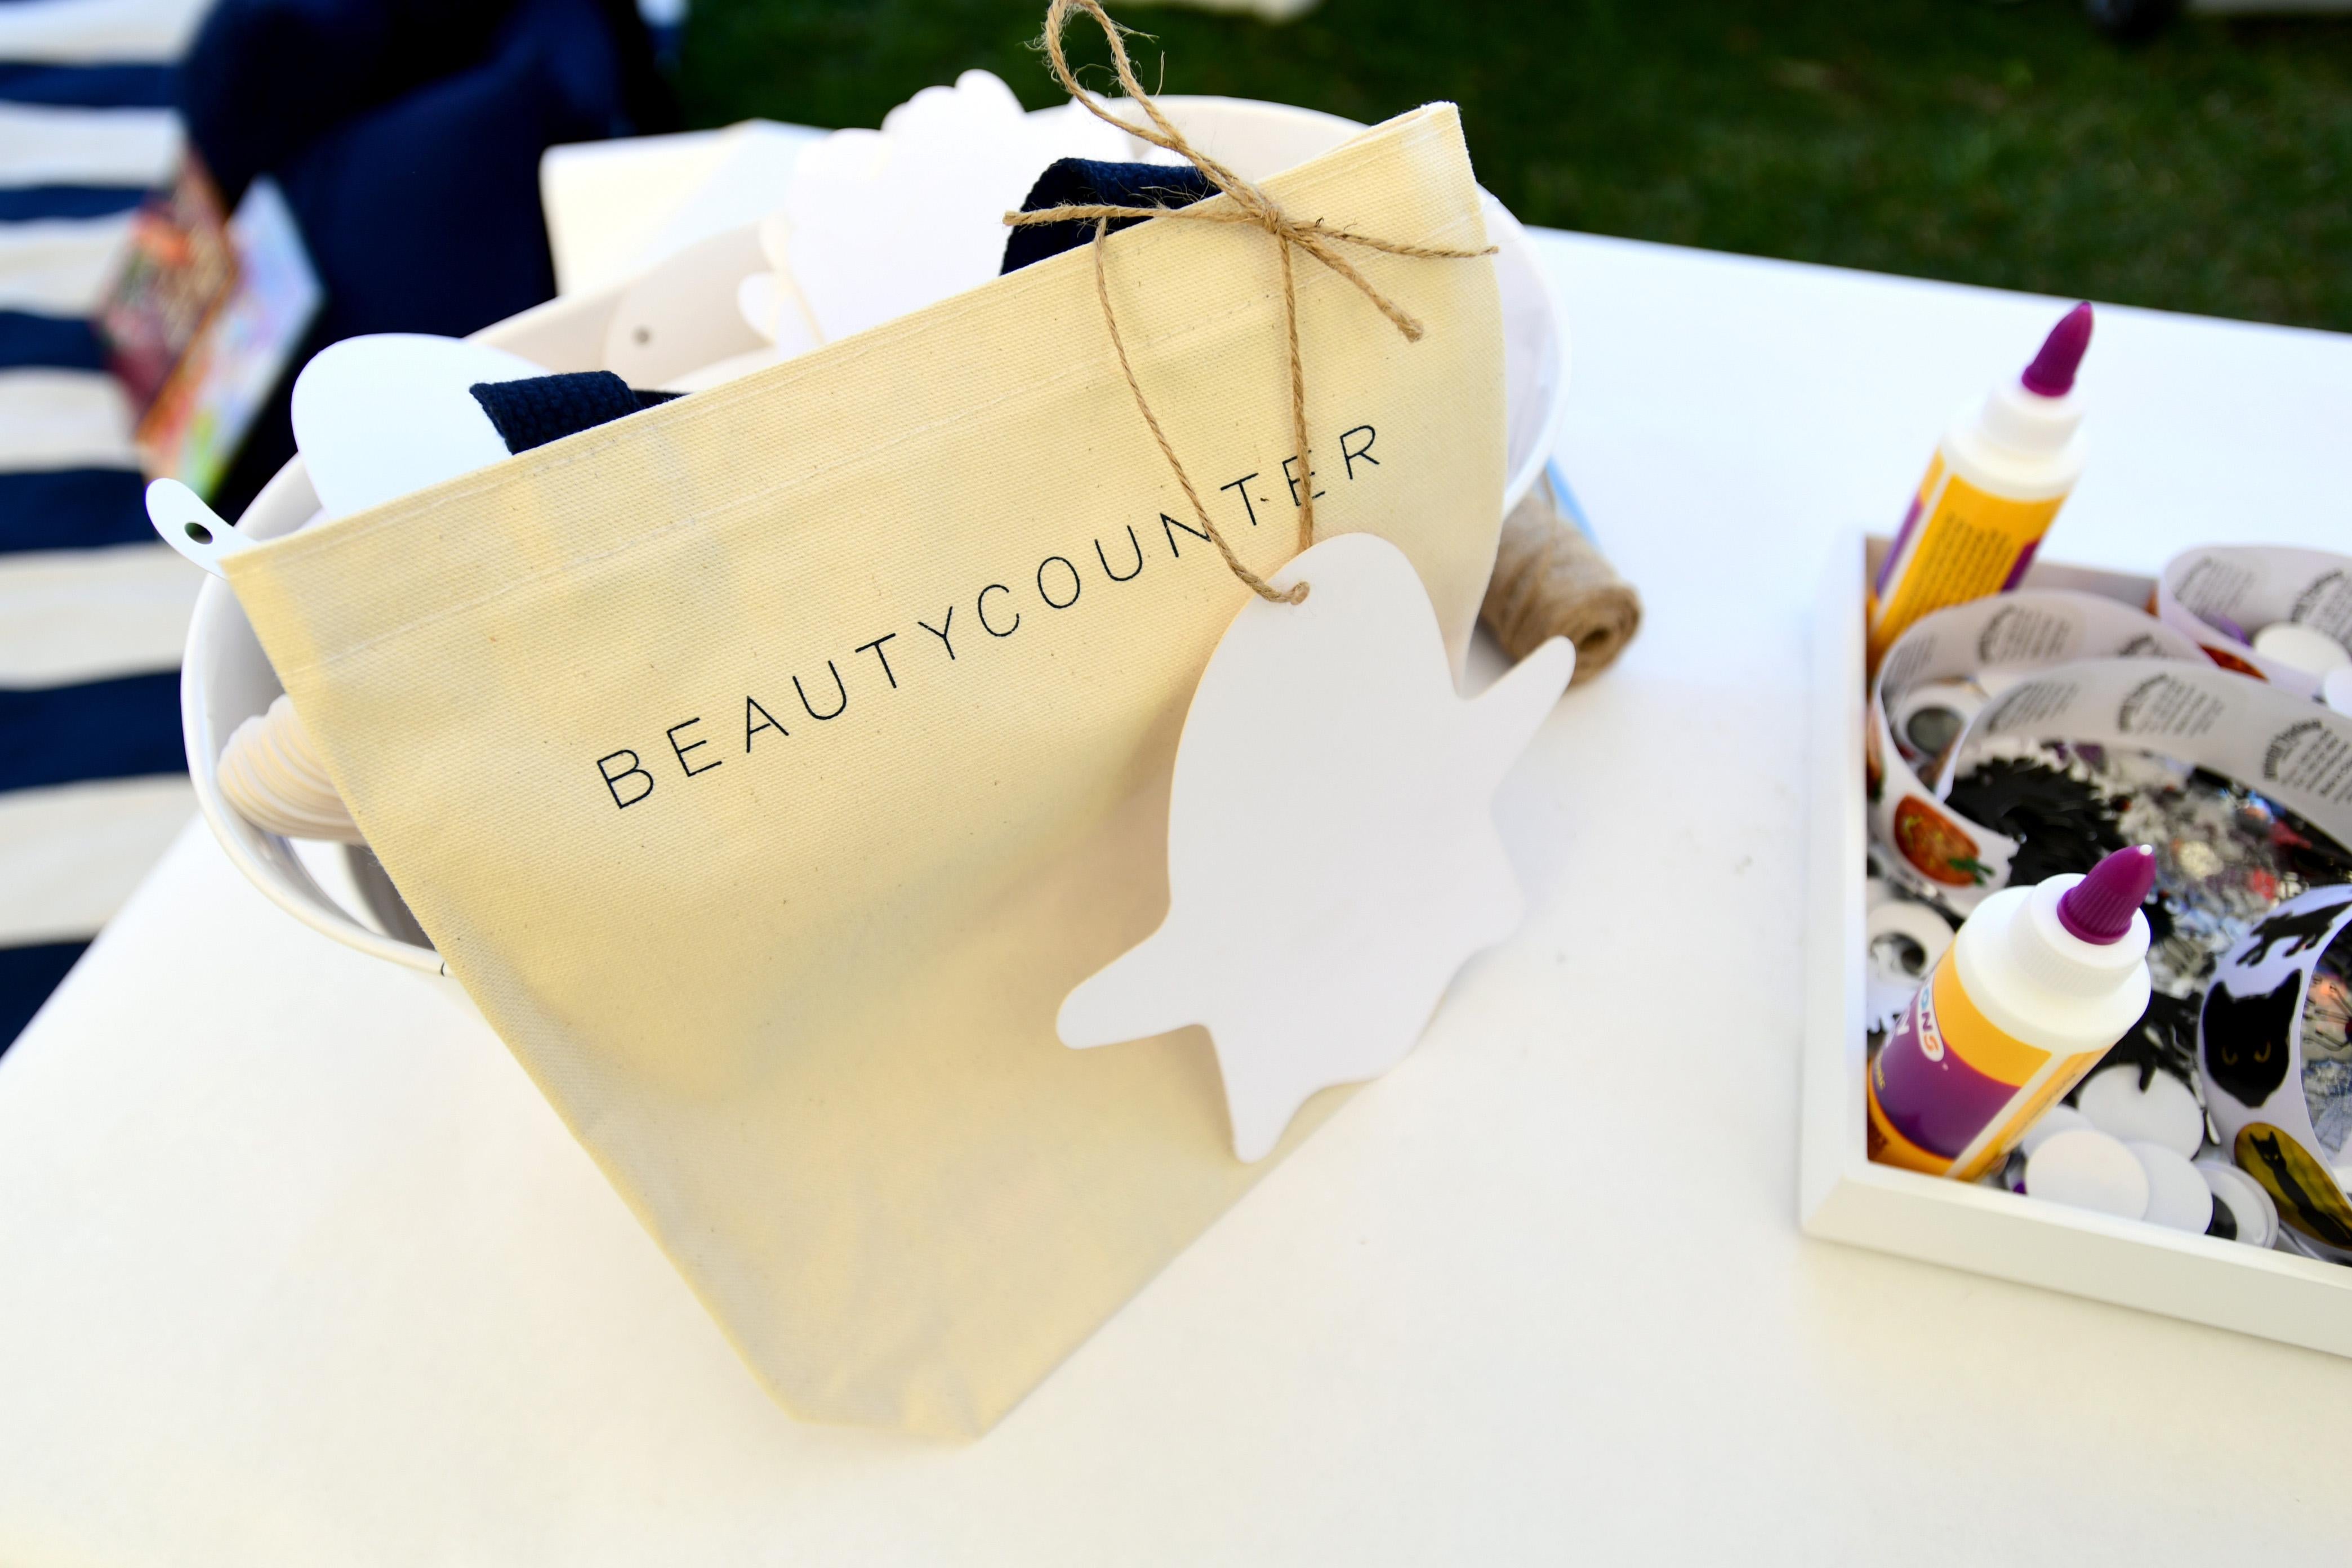 A yellow gift with Beautycounter on it sits on a white table.